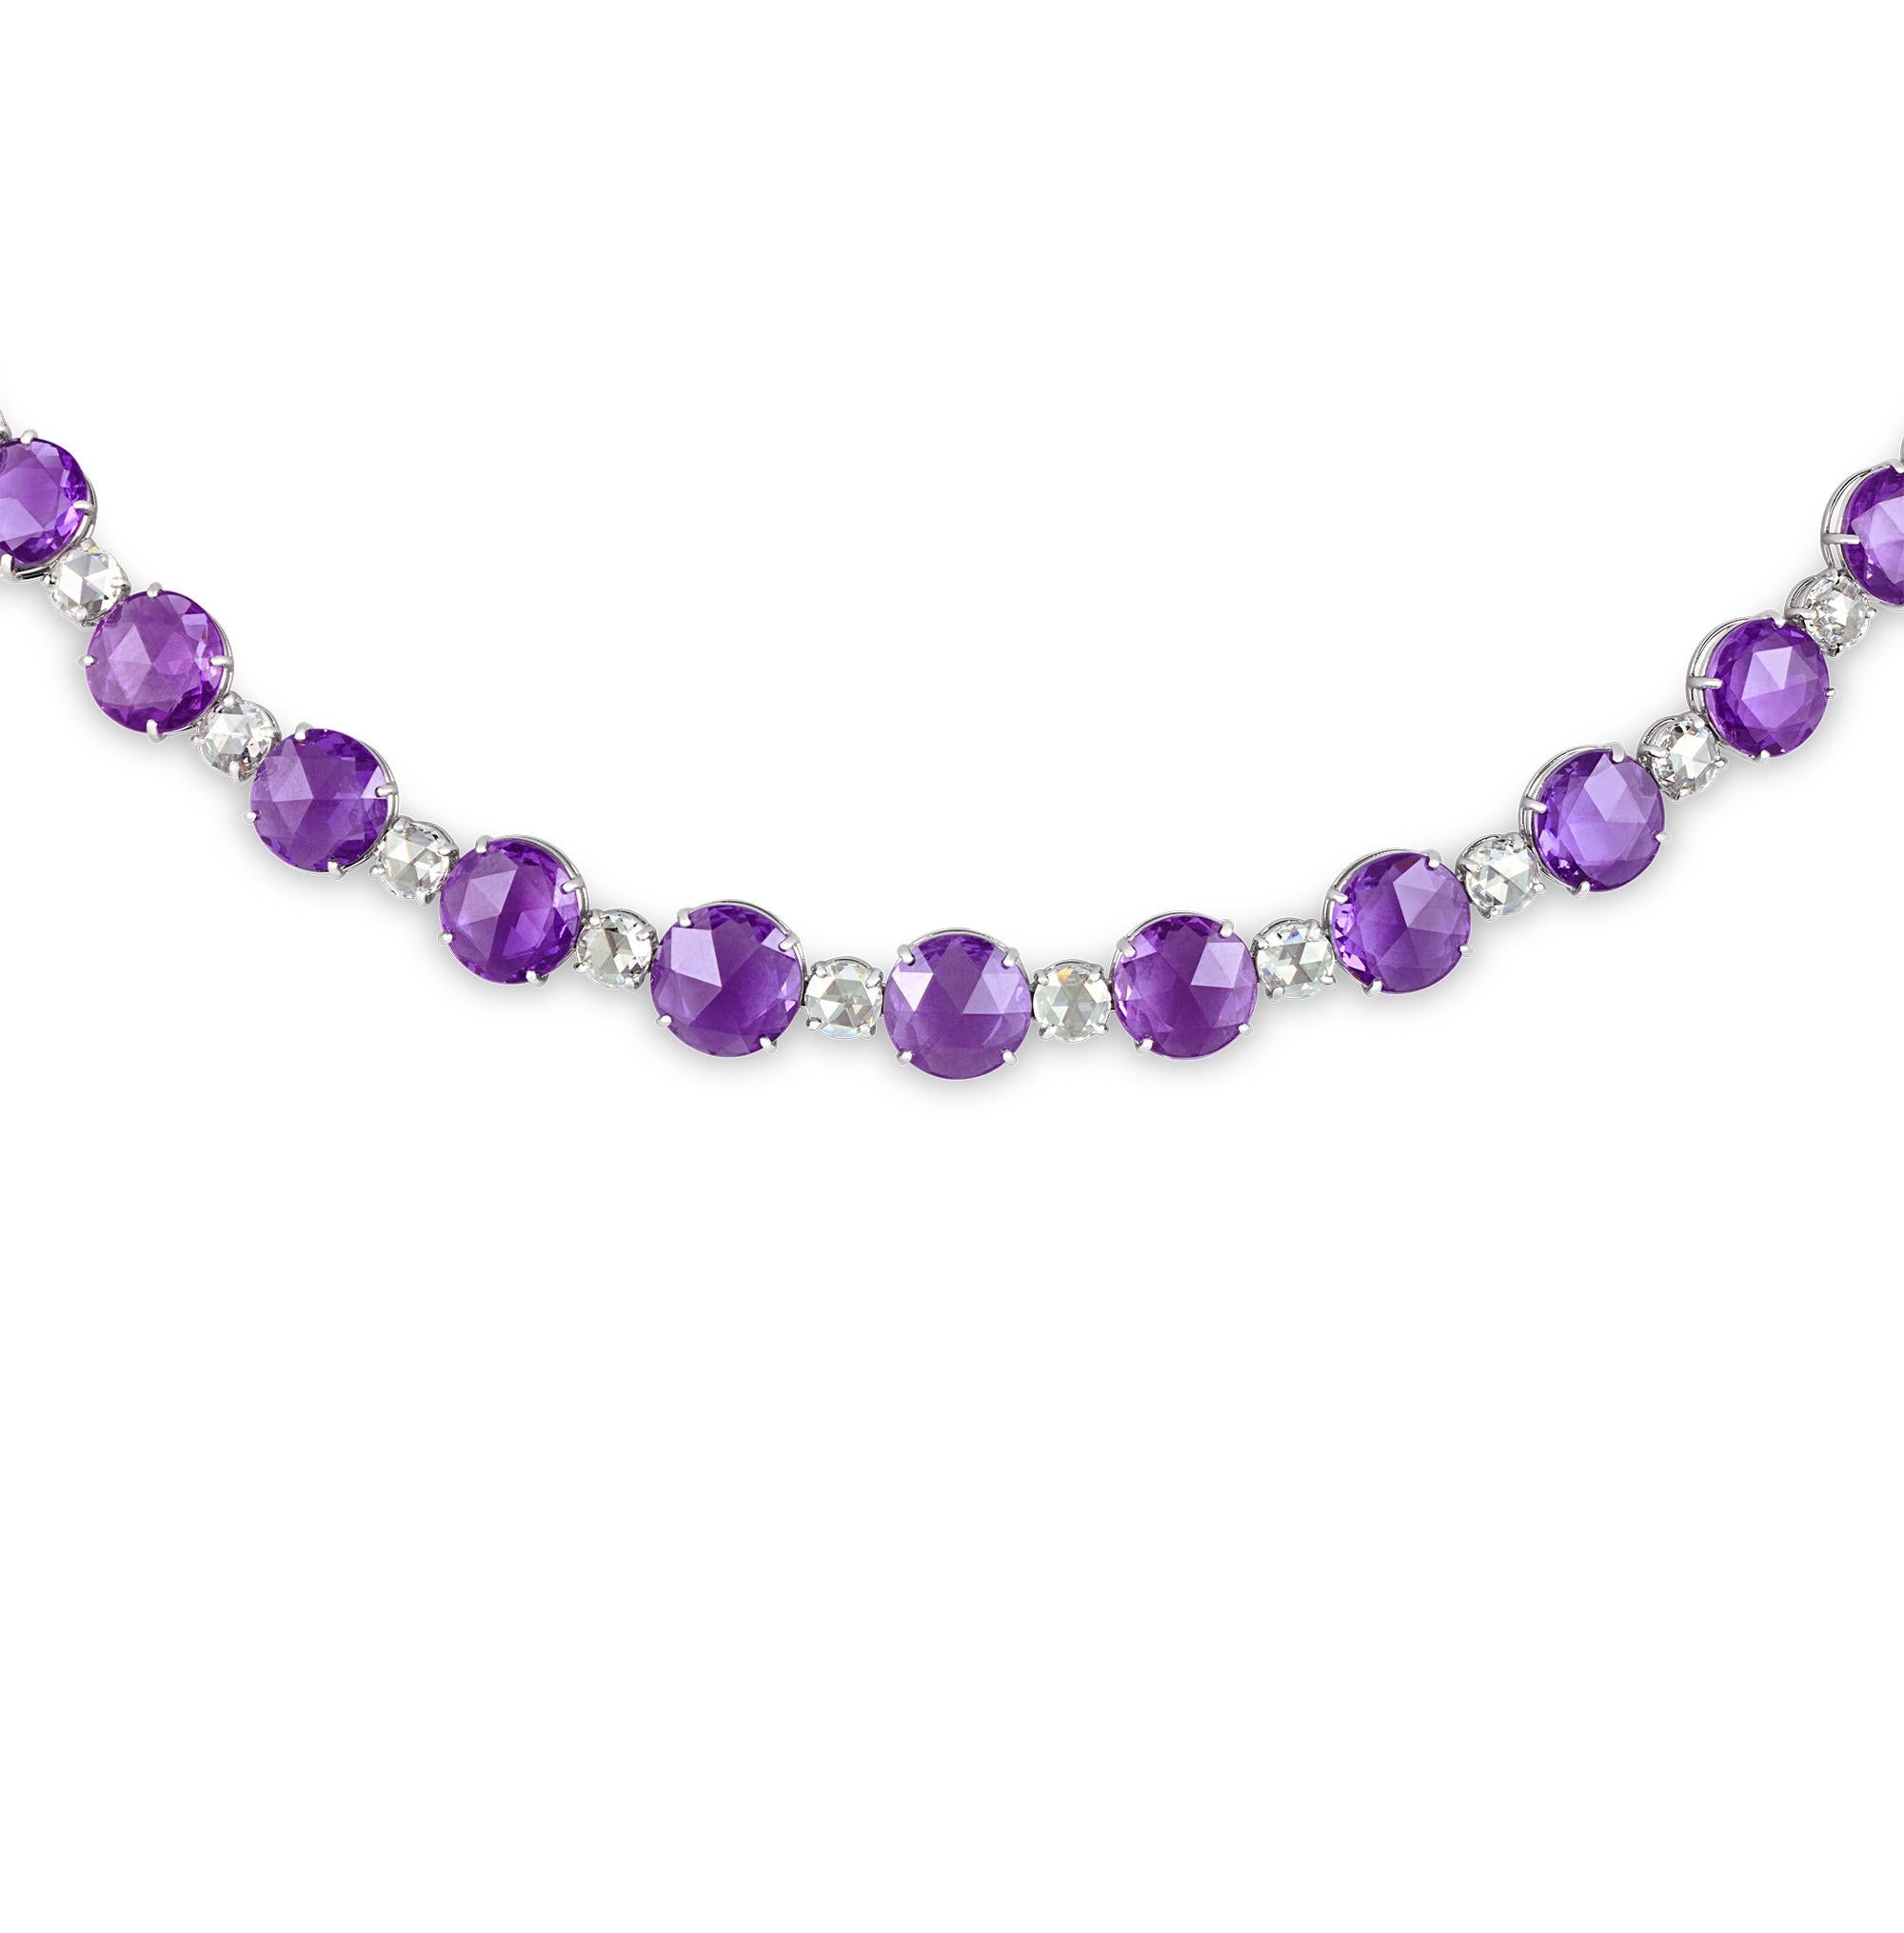 This striking and elegant necklace features luminous purple sapphires and glittering white diamonds. The thirty-one sapphires, totaling 47.52 carats, display a coveted lilac hue. The jewels are certified by C. Dunaigre as being all-natural, with no